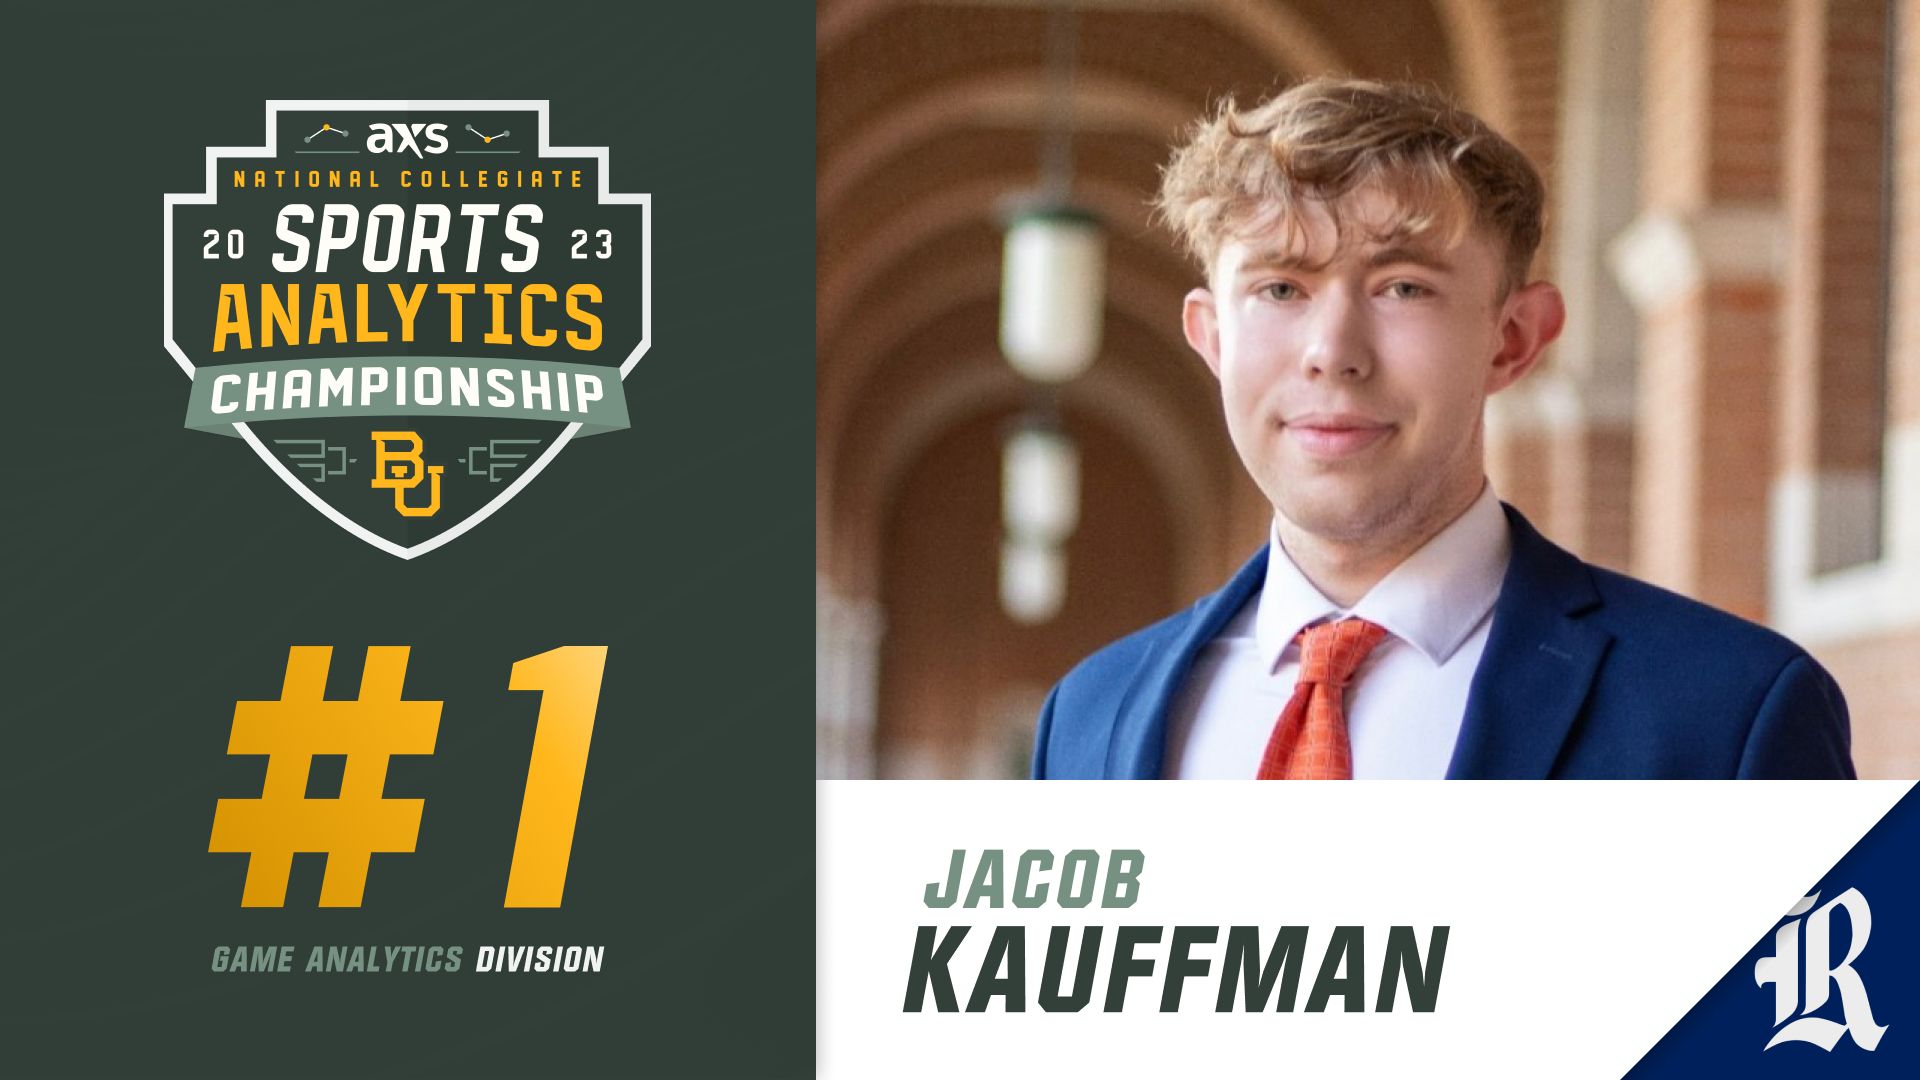 Jacob Kauffman '23 wins the “Game Analytics” division of the AXS National Collegiate Sports Analytics Championship